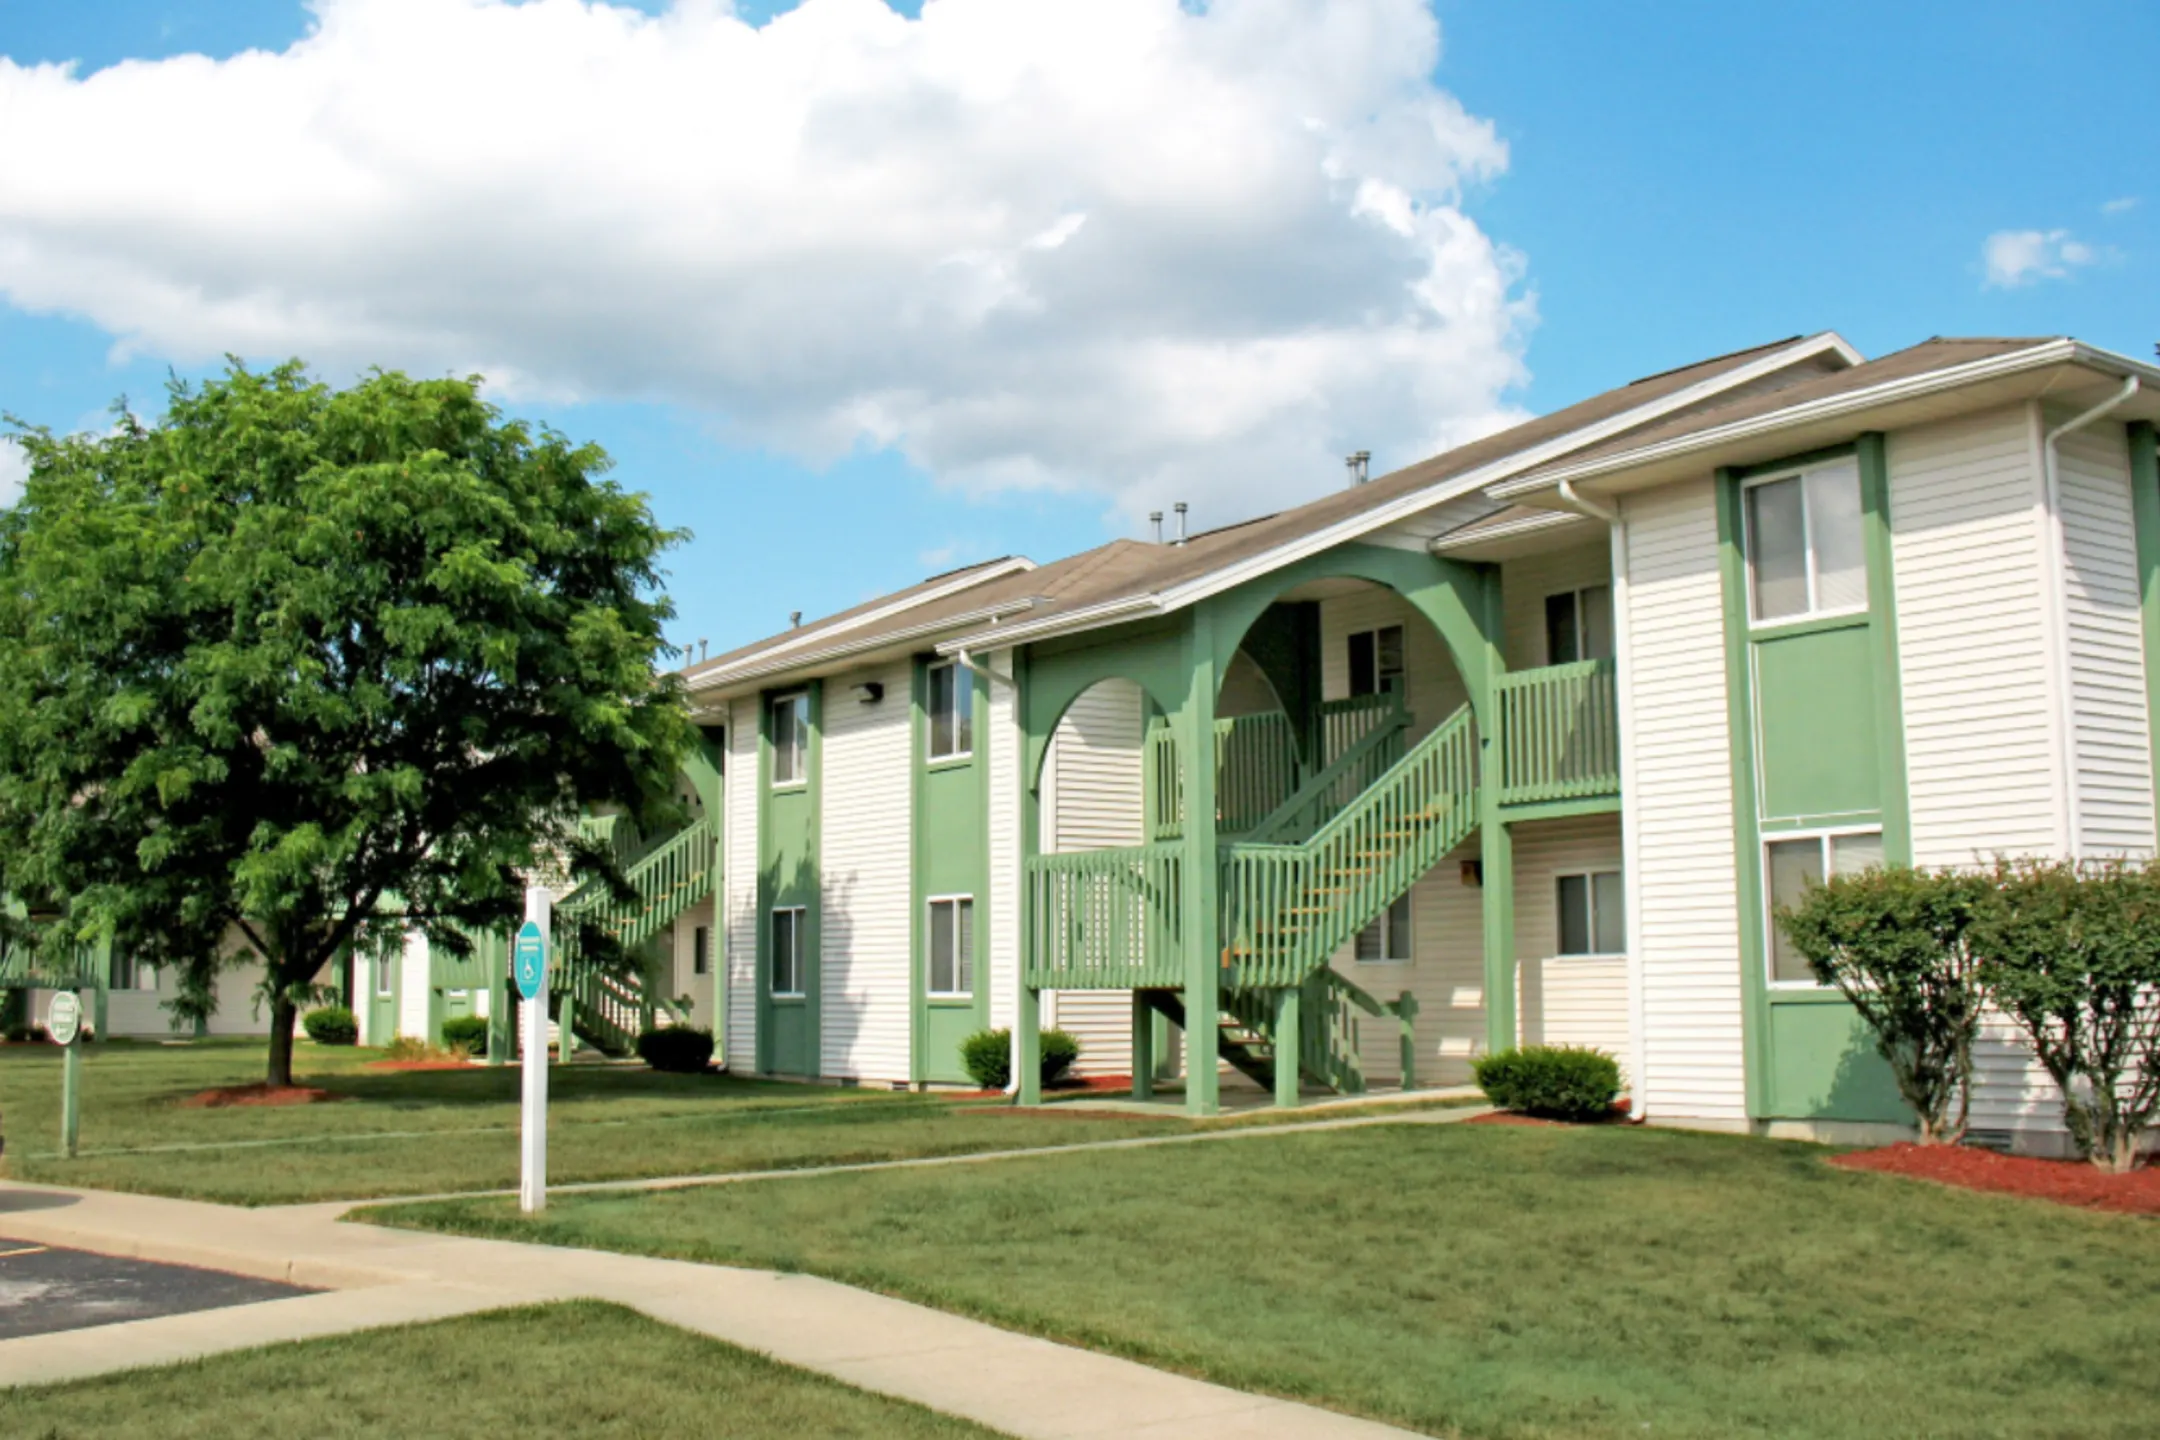 Building - Country View Apartments - Toledo, OH